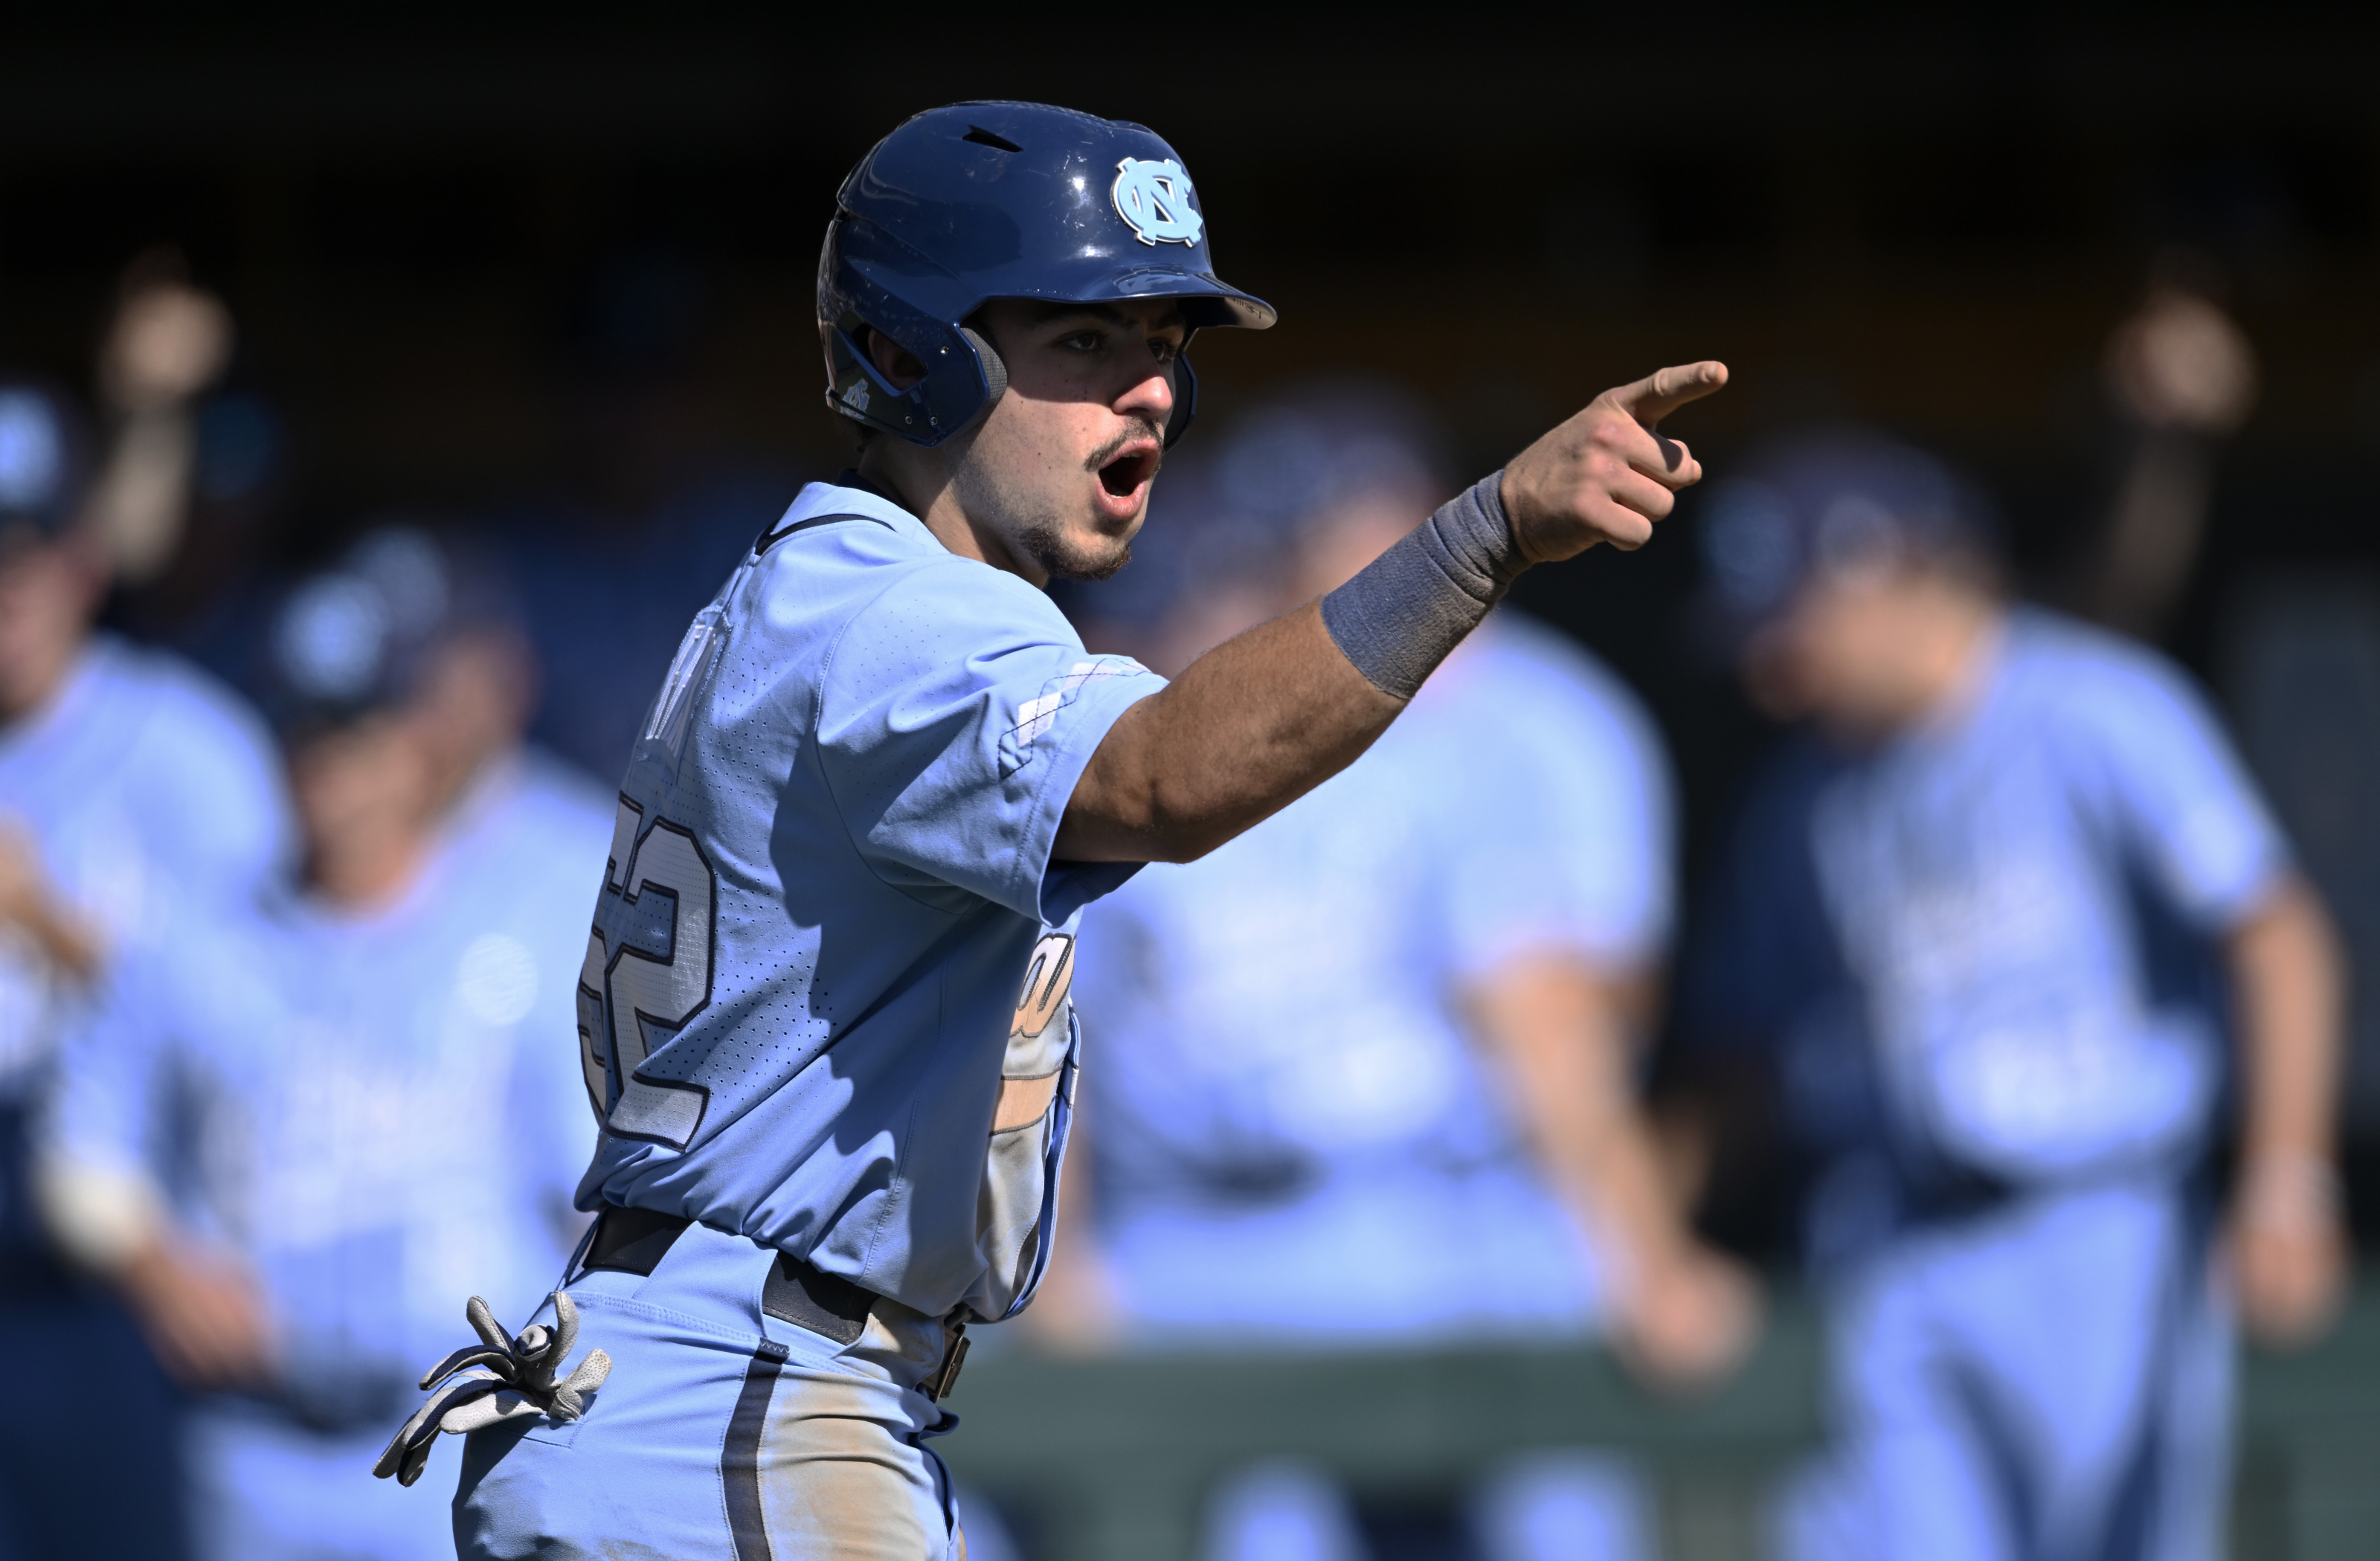 UNC Baseball Offense Comes To Life, advances to Semifinals